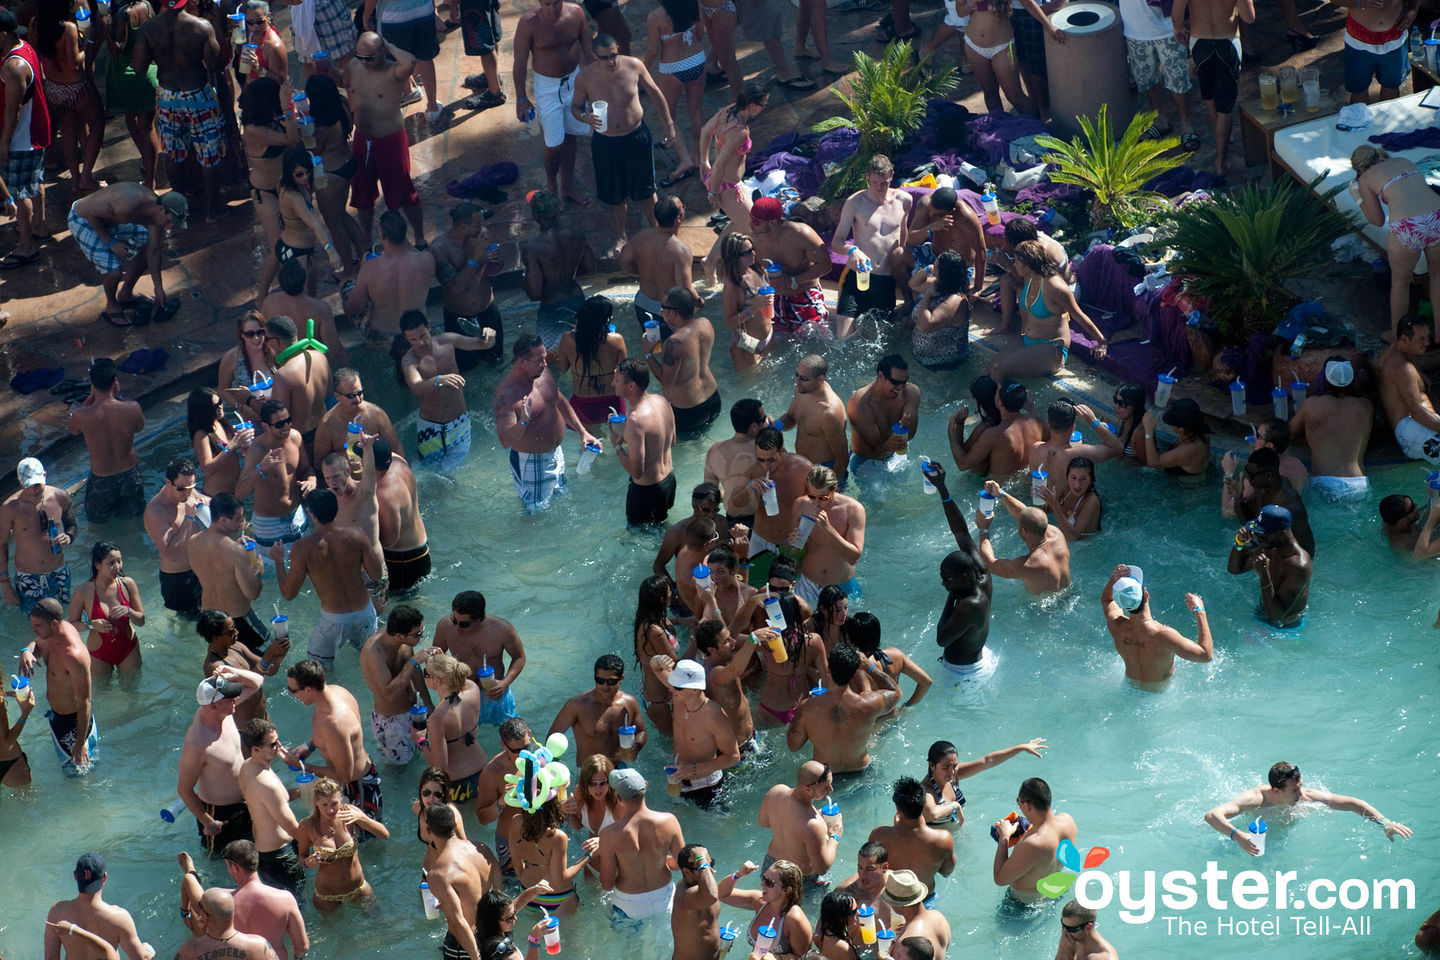 The Best Pools and Pool Parties in Sizzling Las Vegas - Canadian Traveller